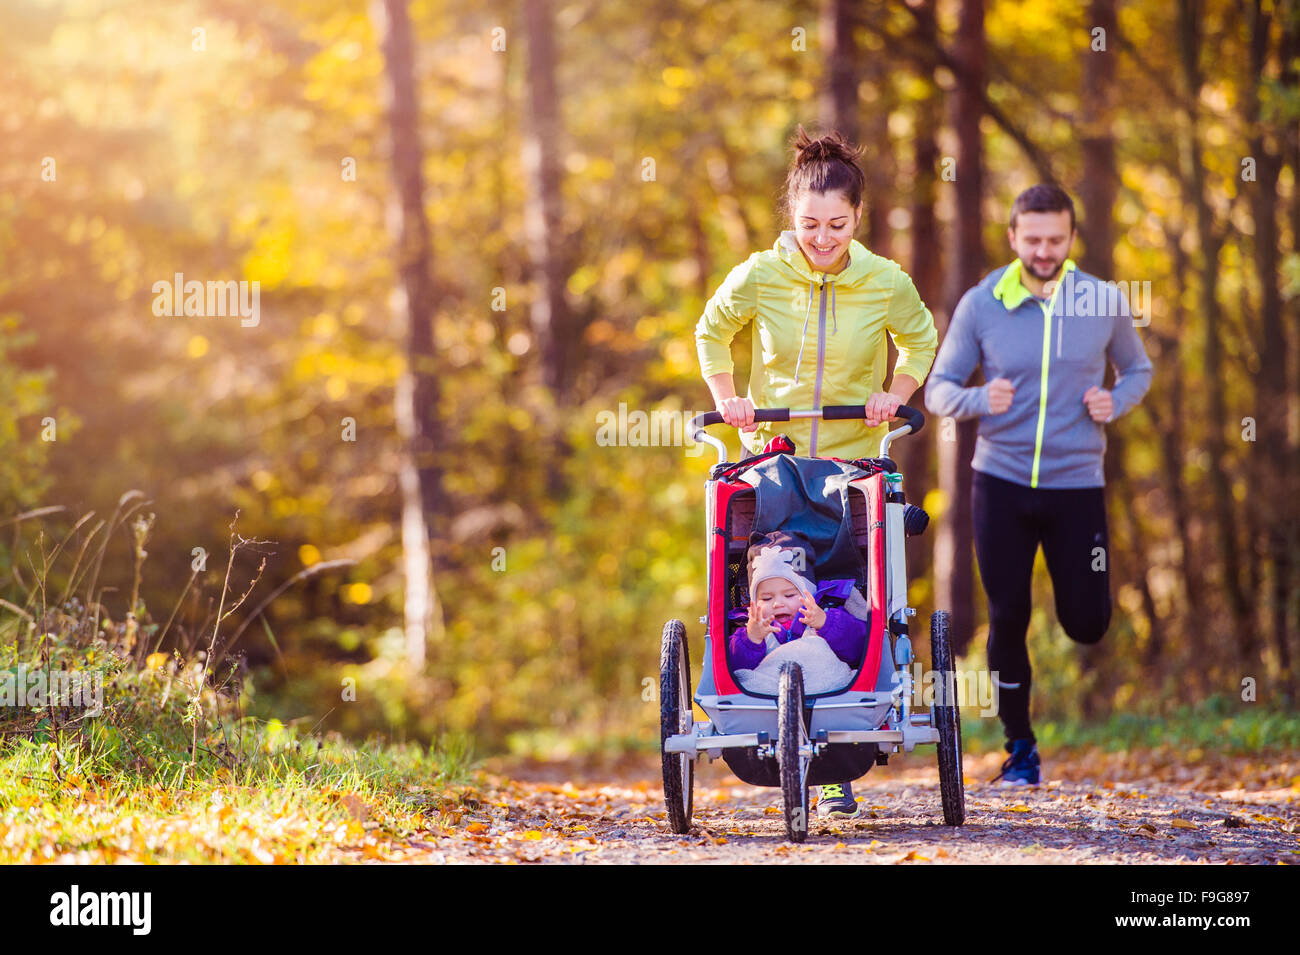 Beautiful young family with baby in jogging stroller running outside in autumn nature Stock Photo